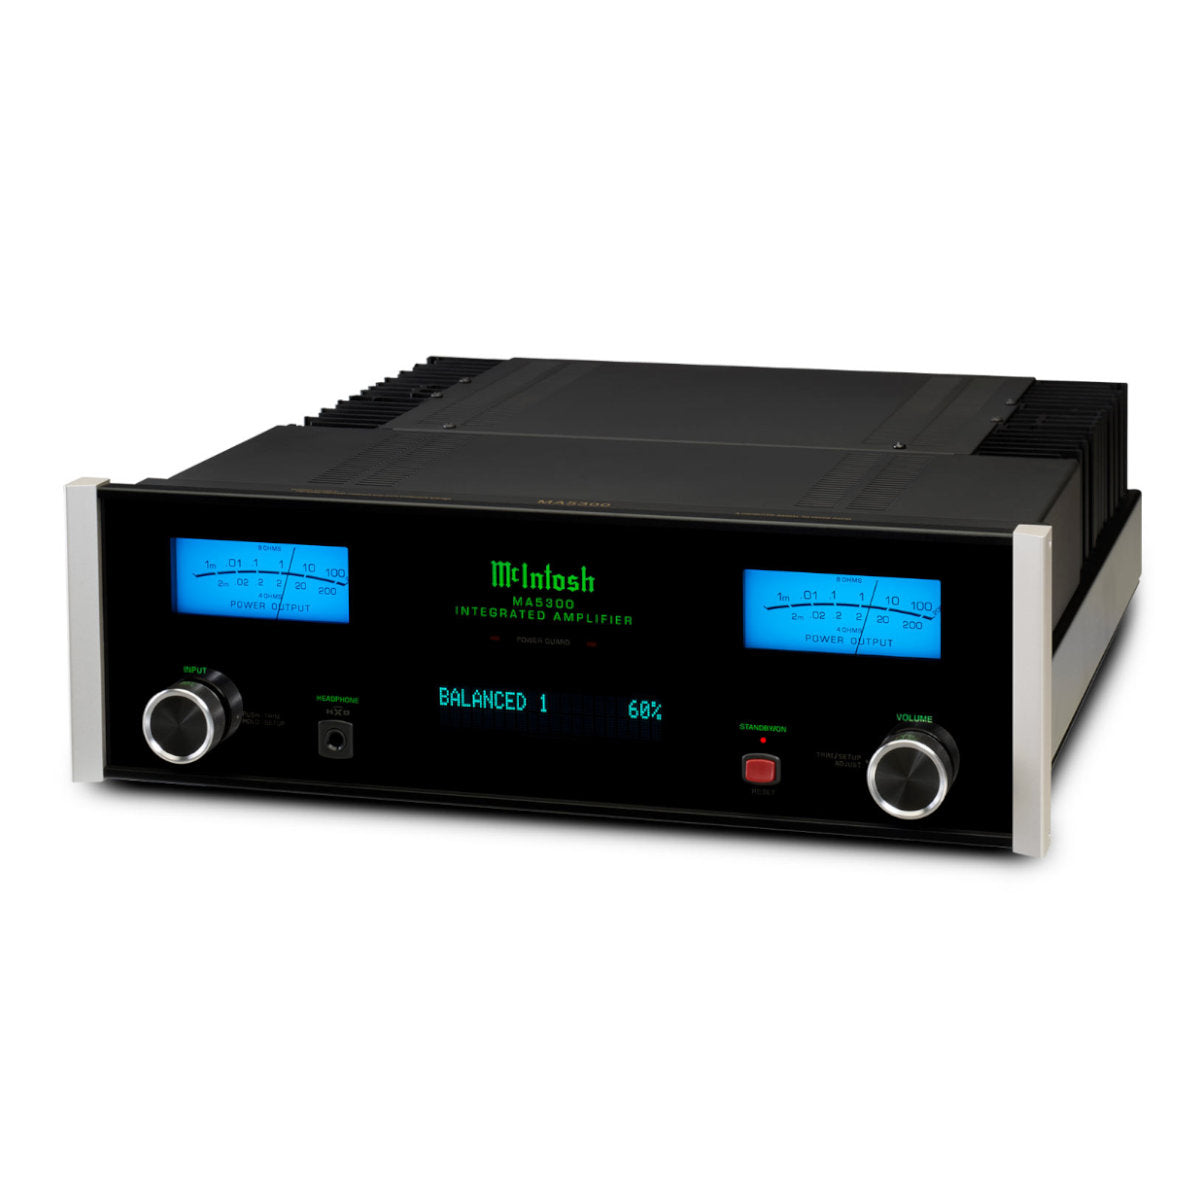 McIntosh MA5300 2-Channel Integrated Amplifier - Ooberpad India